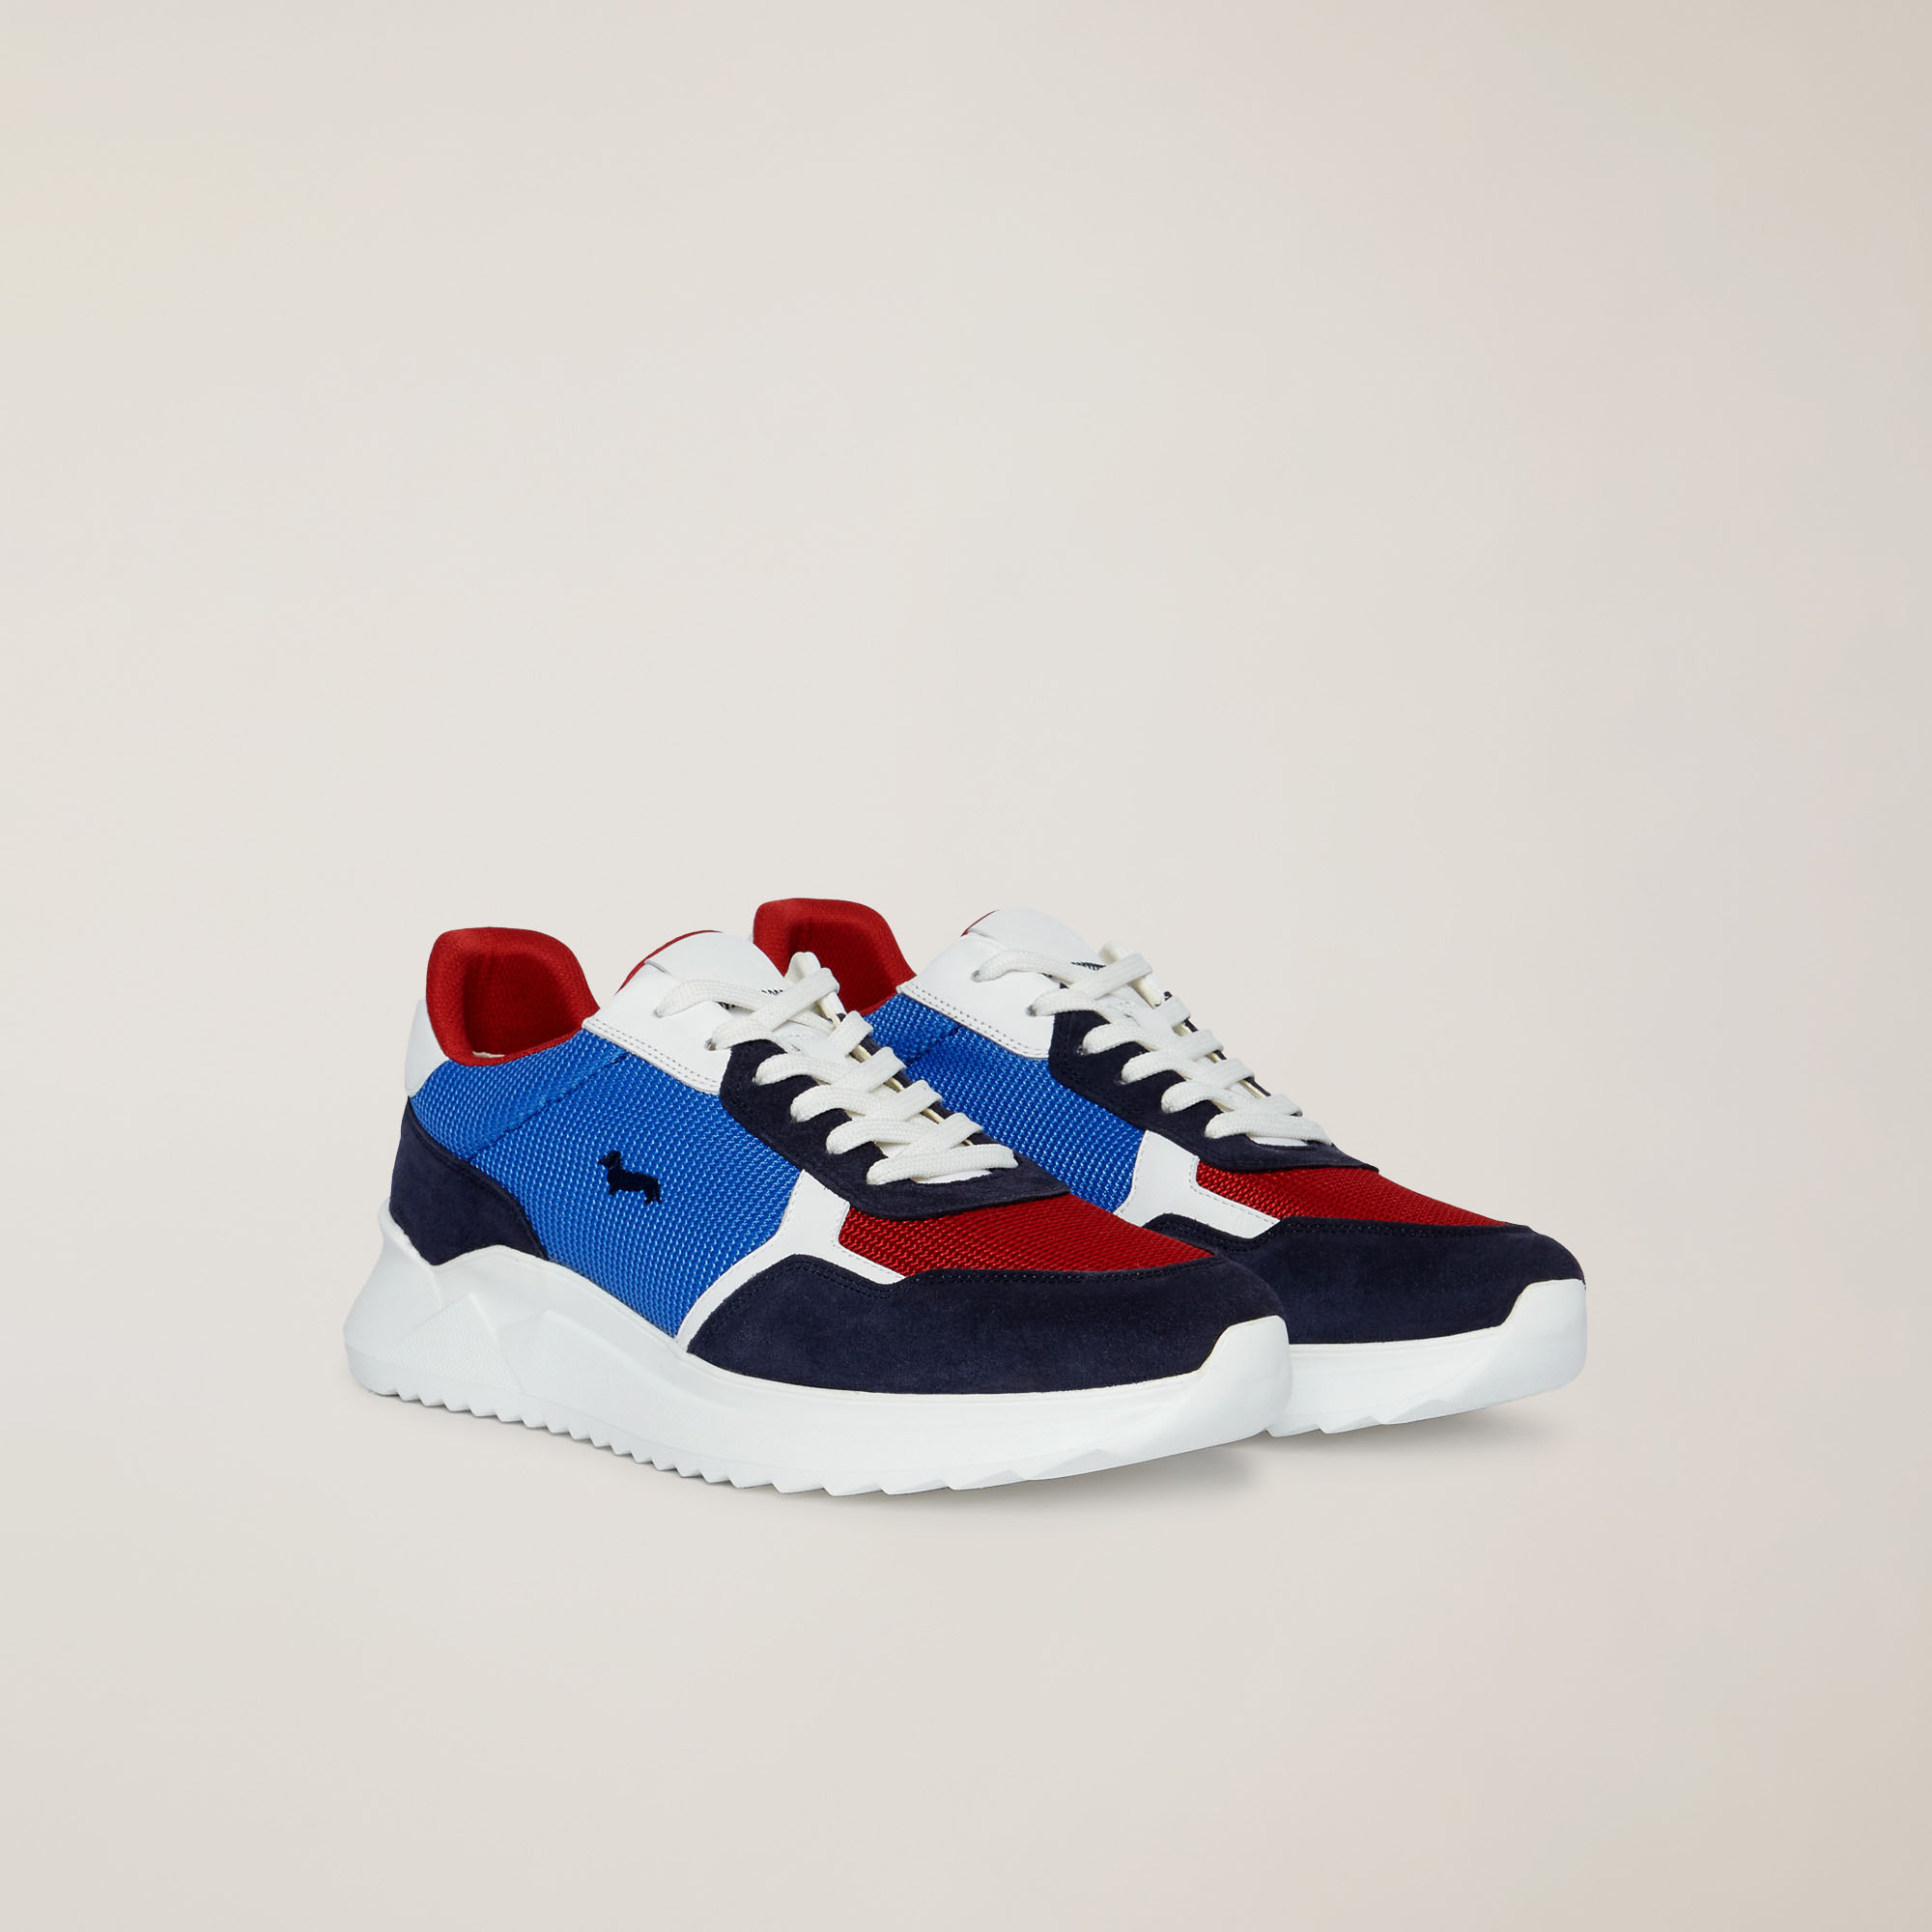 Mixed-Material Sneaker, Blue/Red, large image number 1